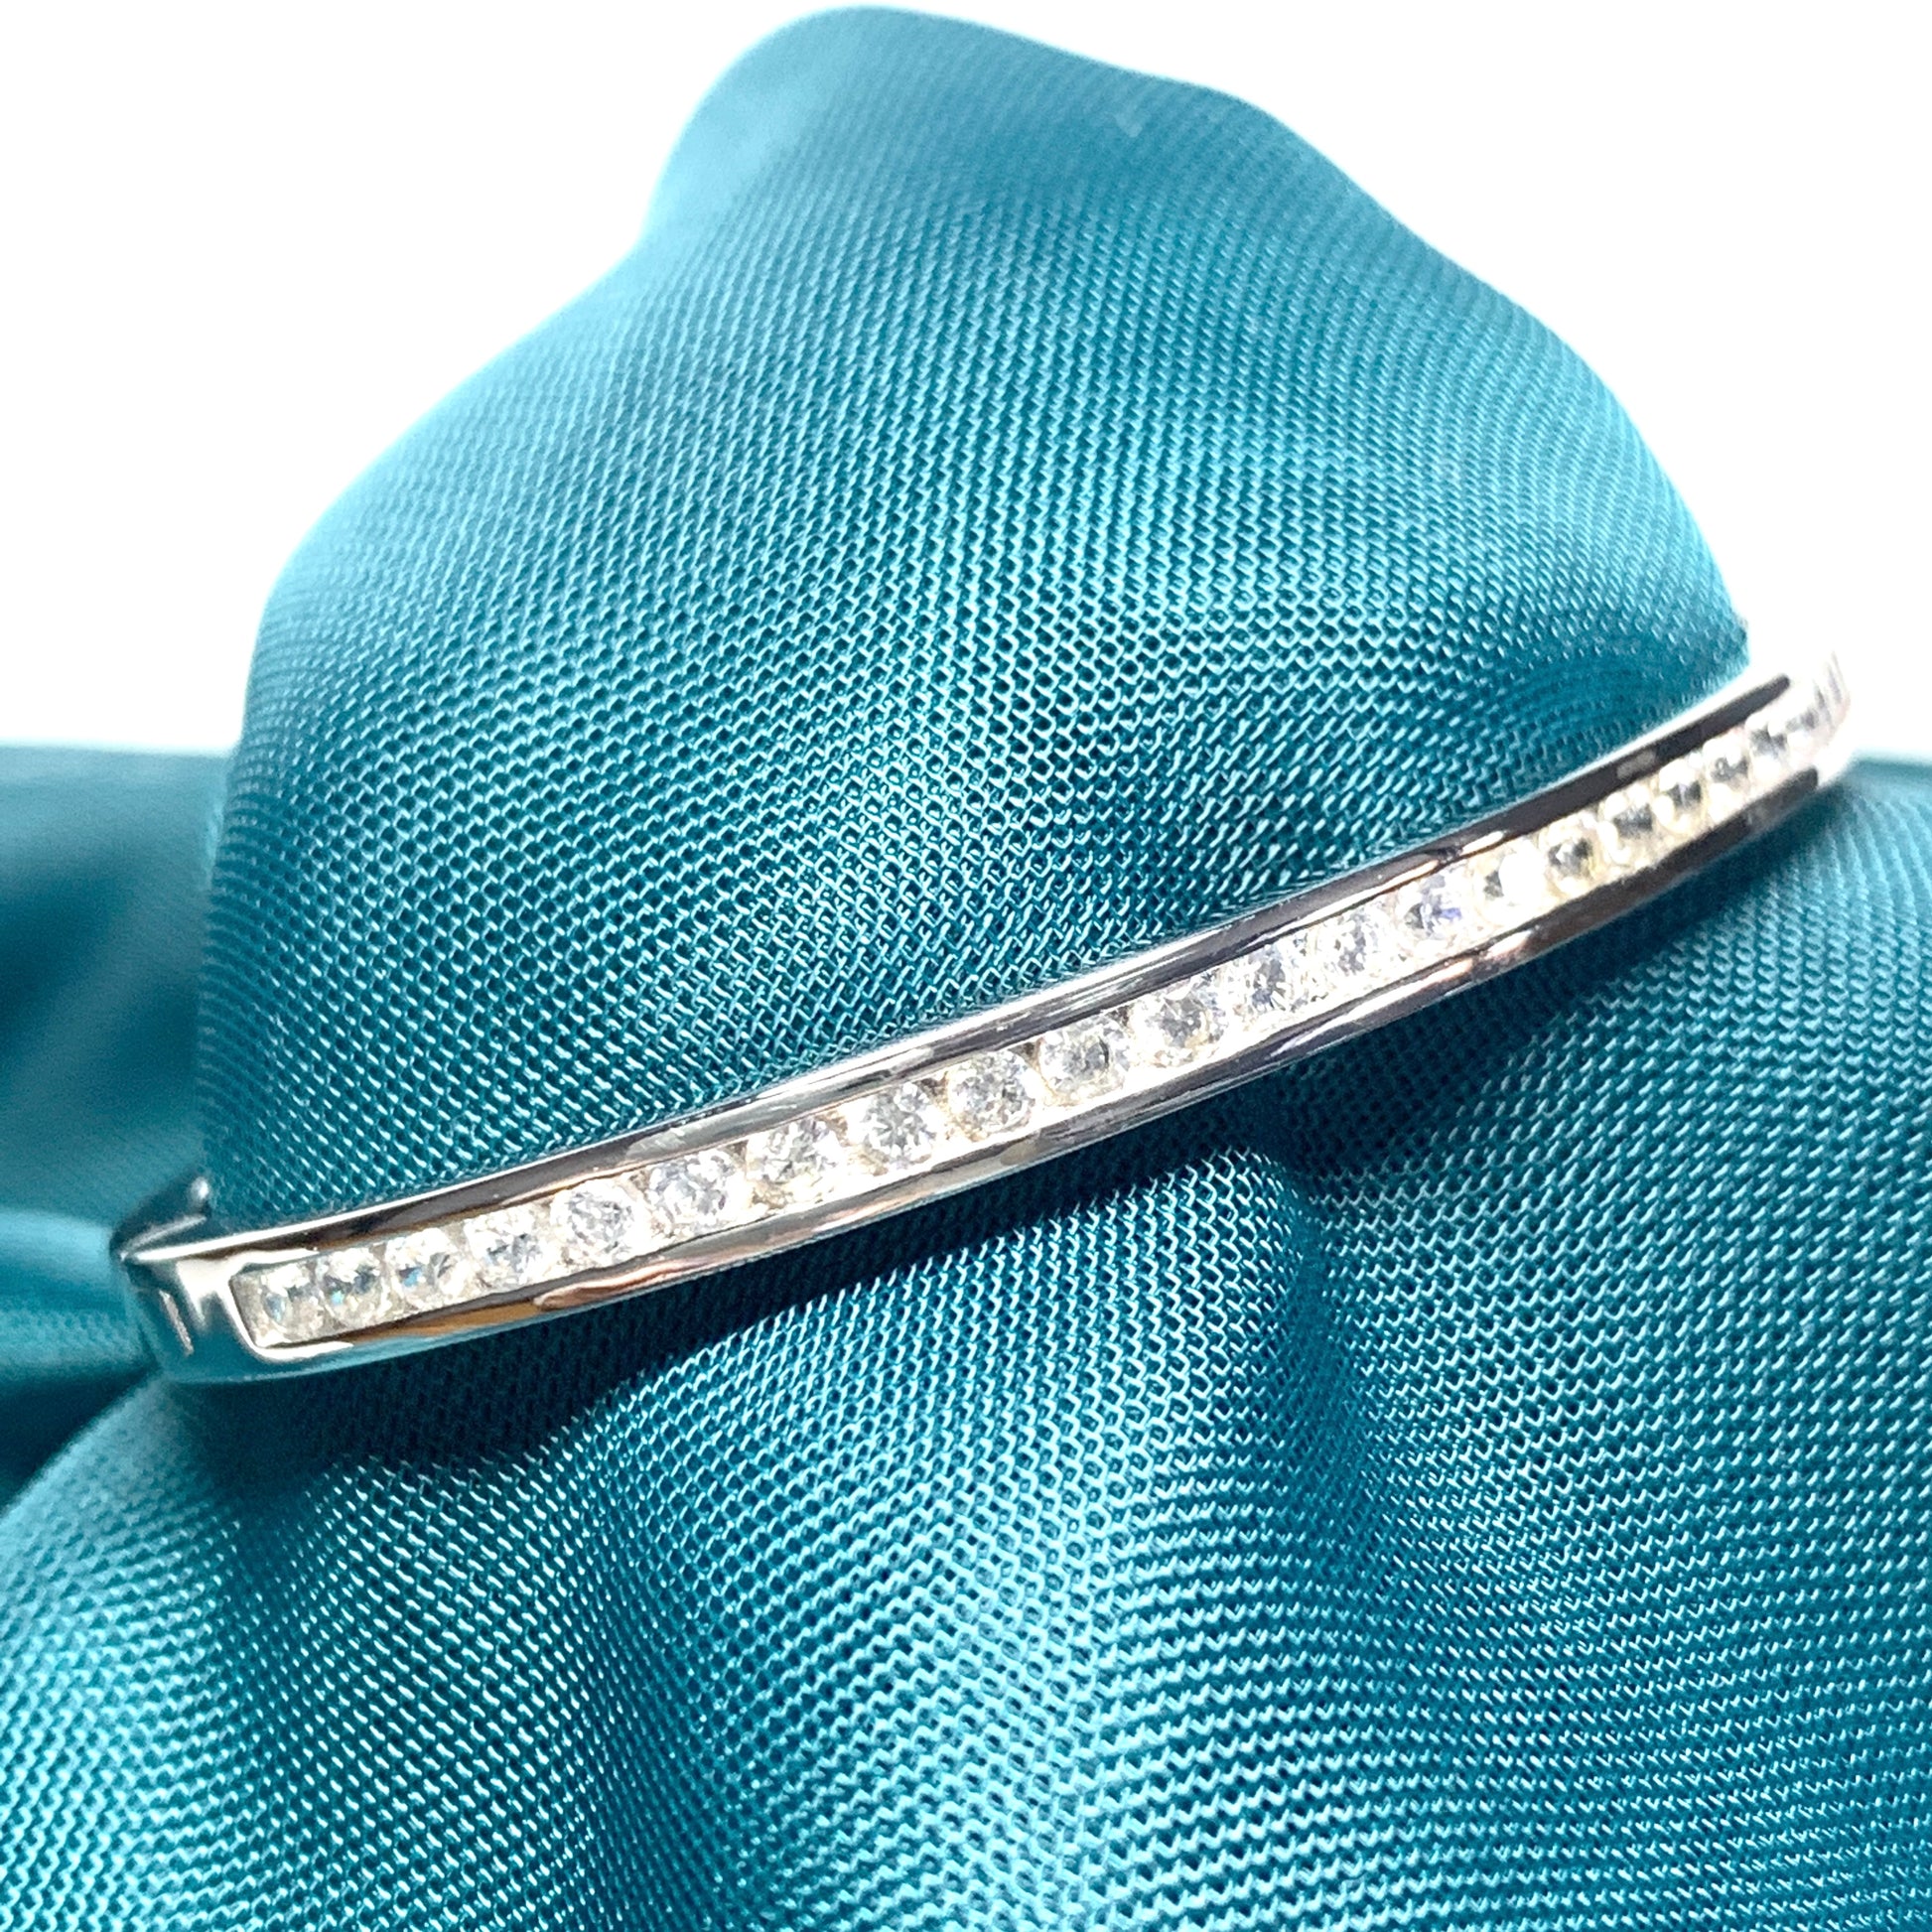 Oval Bangle with Round Cubic Zirconia Stones